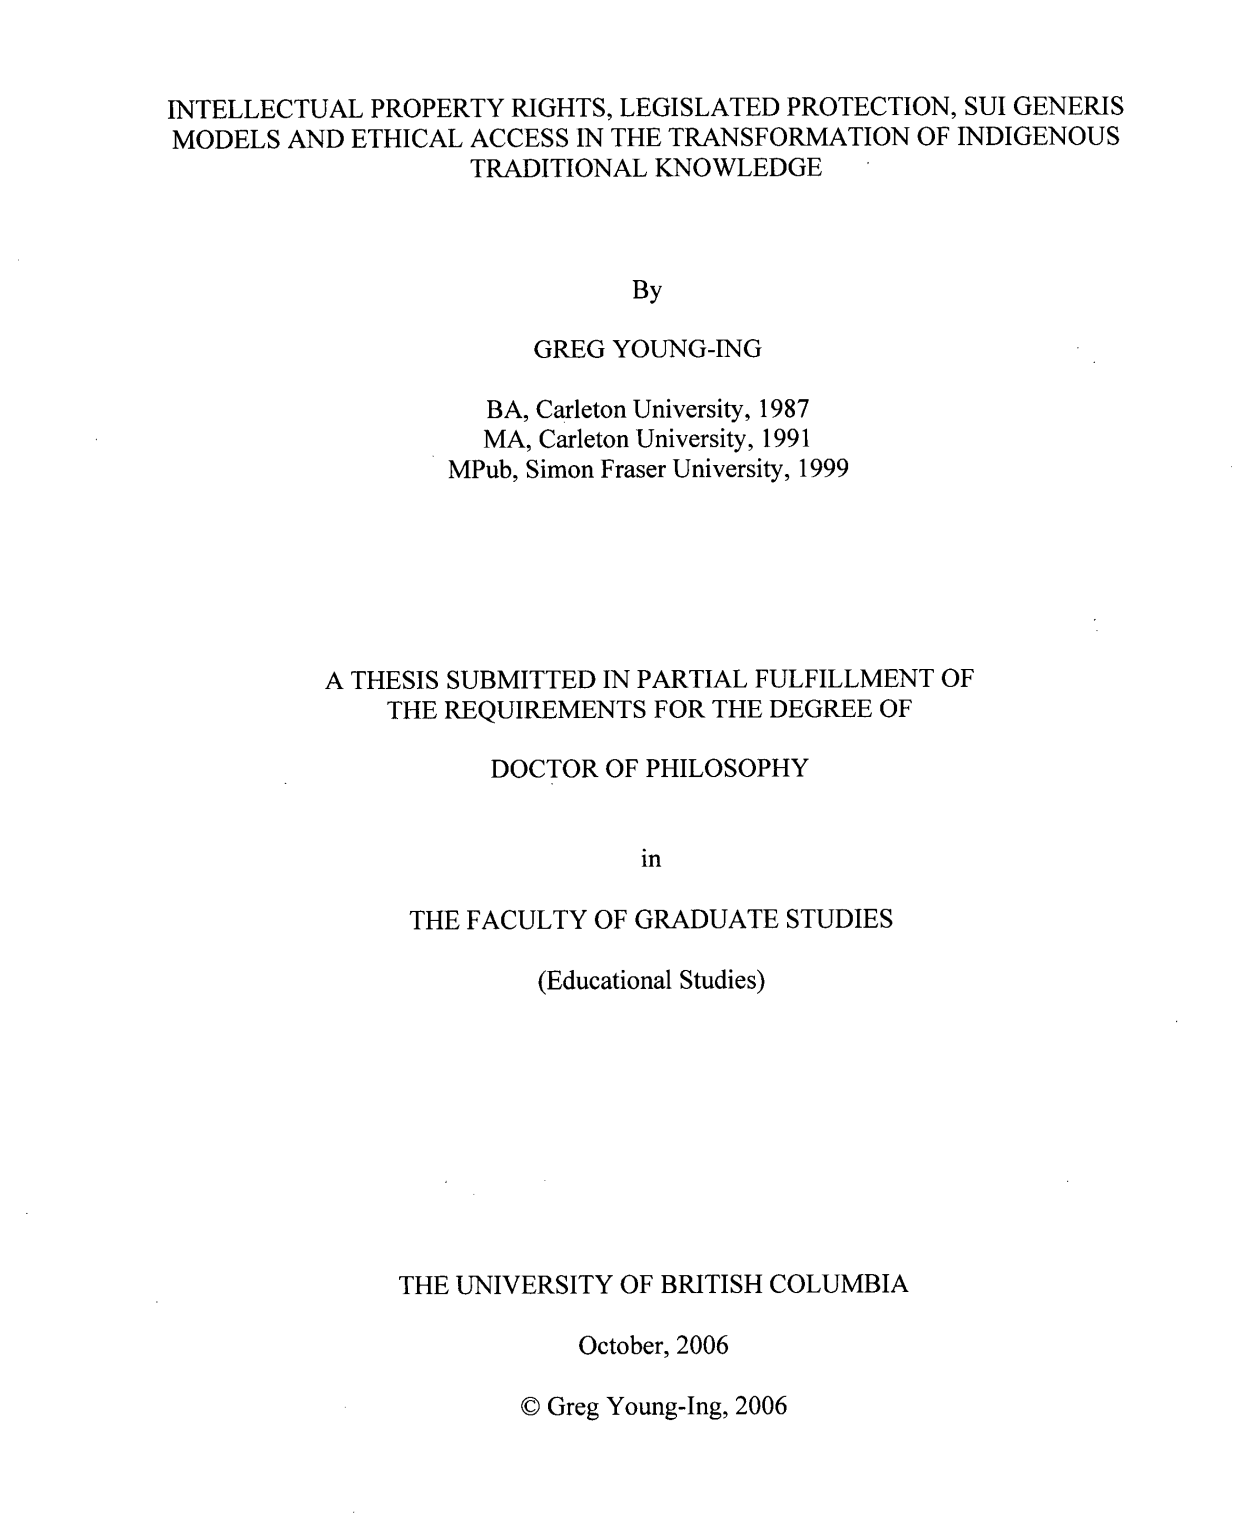 Interesting dissertation of traditional Indigenous knowledge and its intersections with IP law